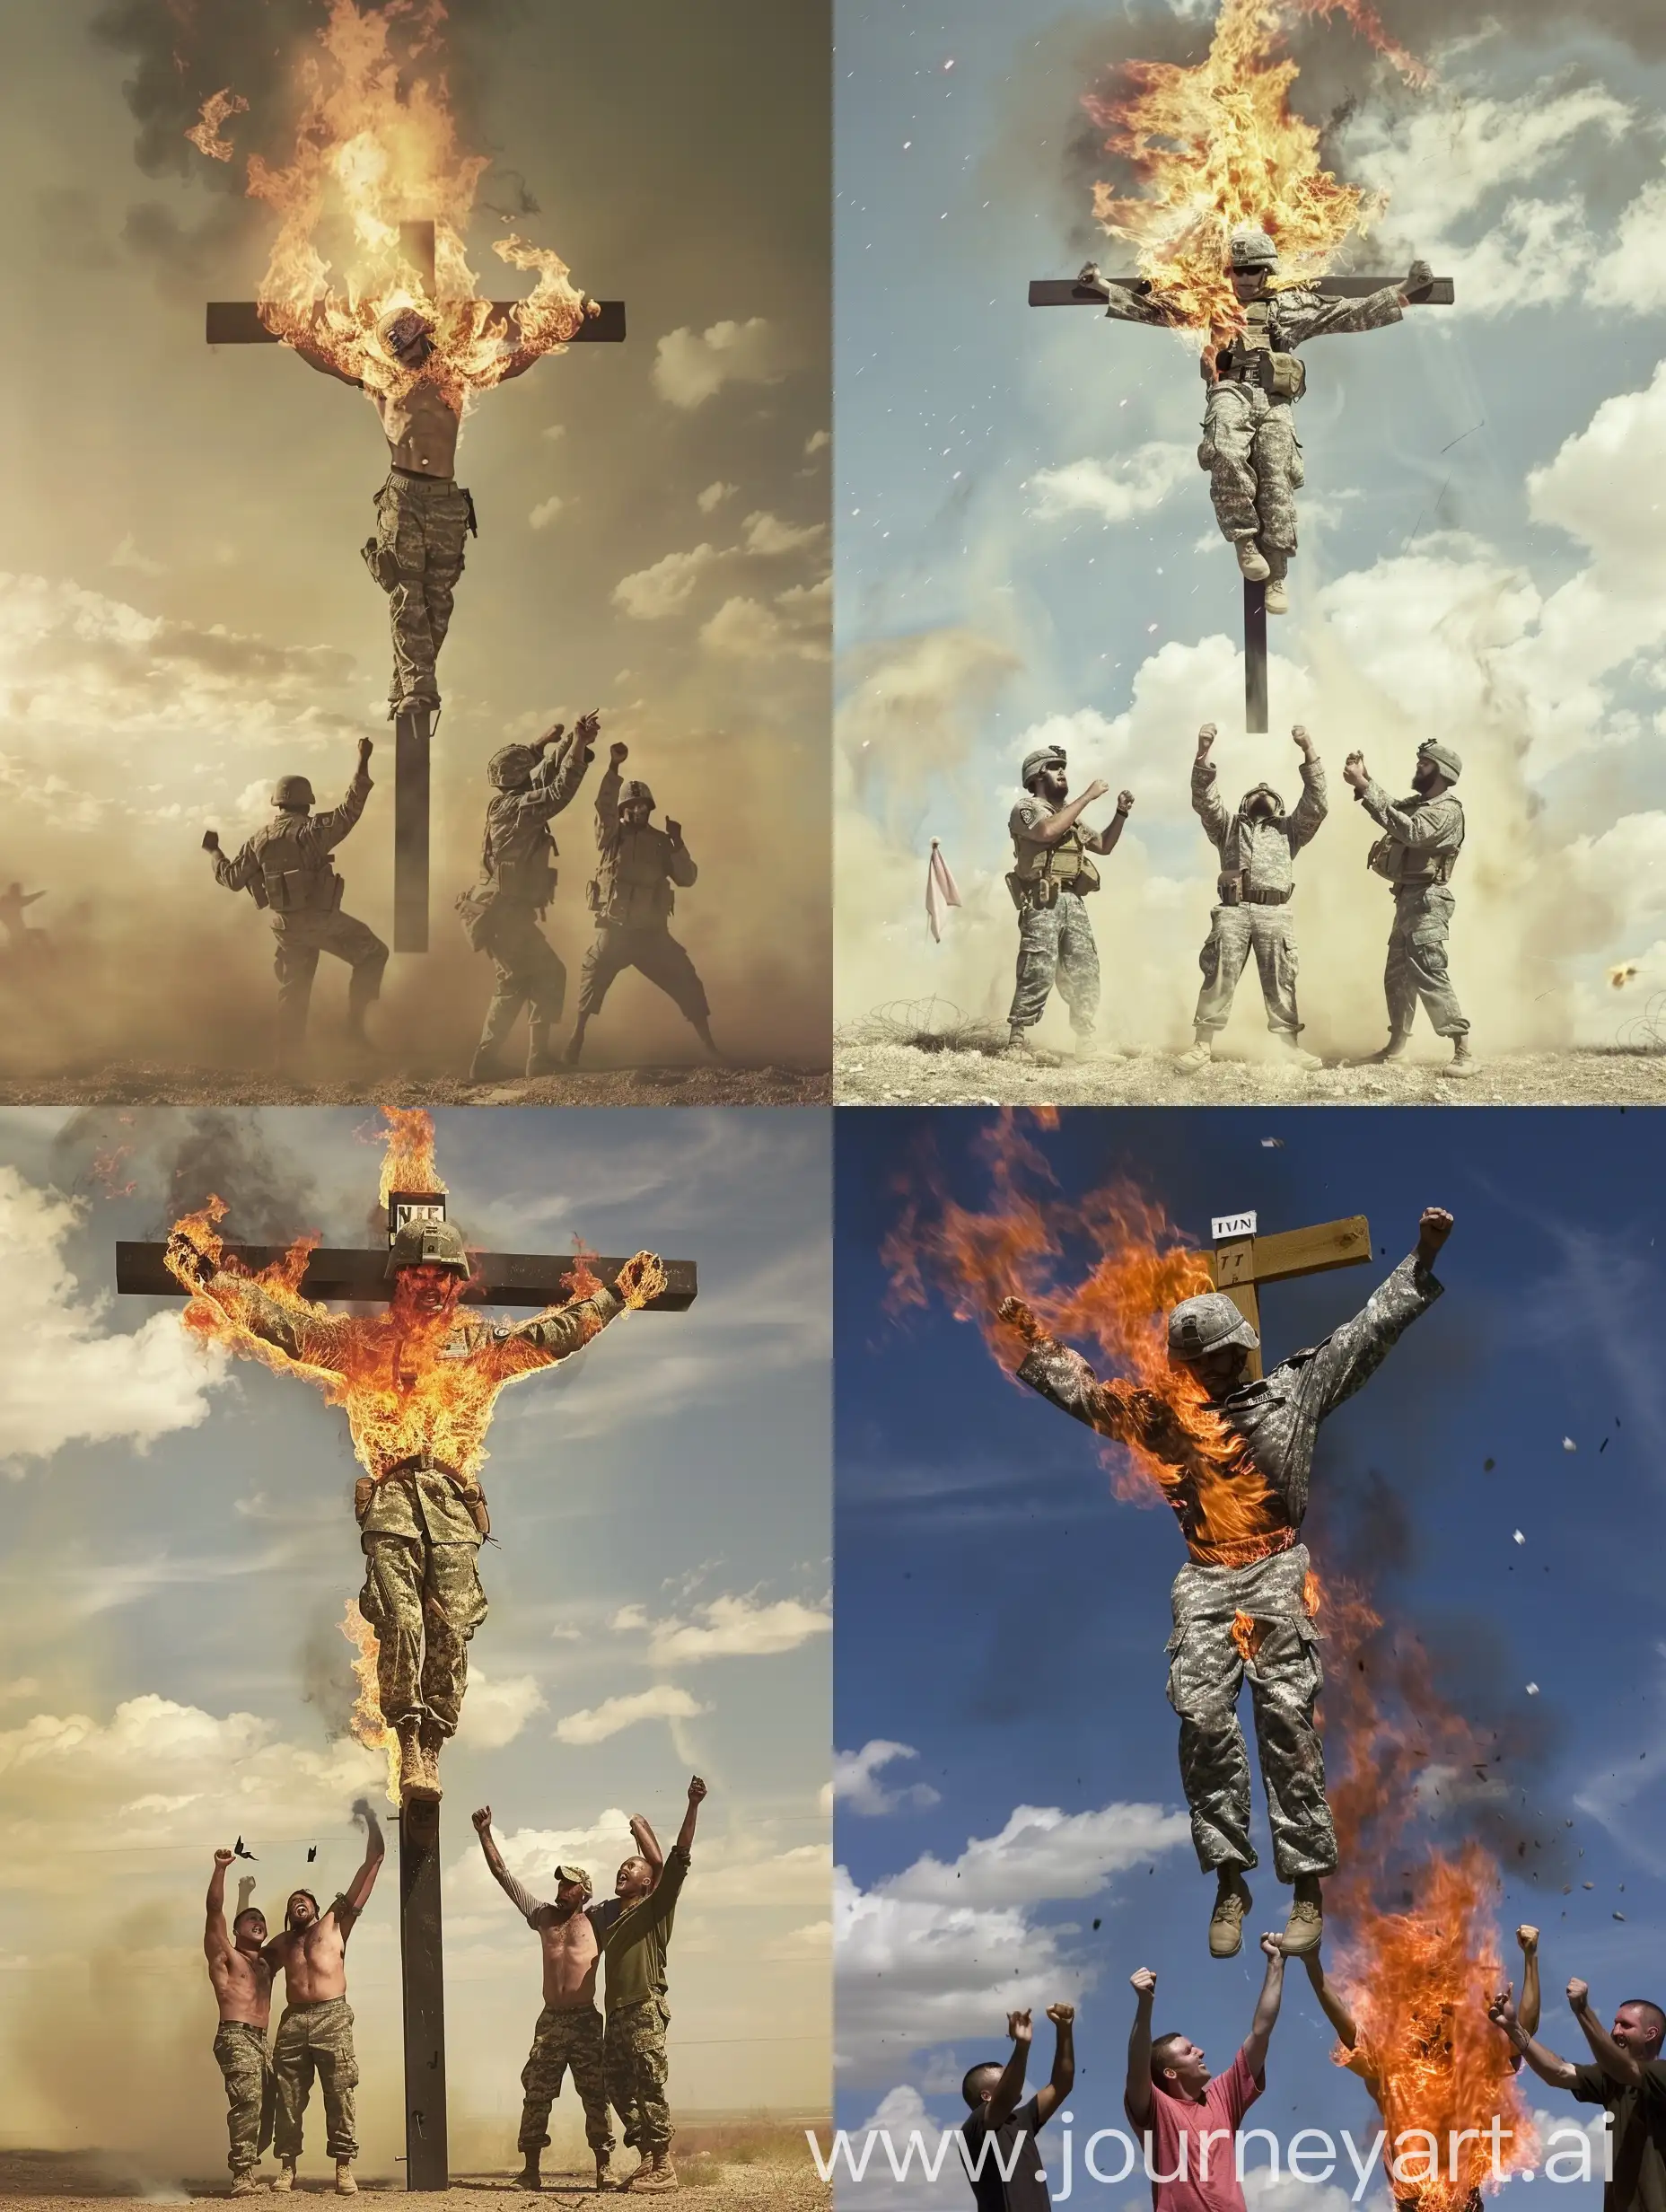 A burning soldier in american uniform engulfed in fire hanging on a cross like Jesus and  three man celebrating under the cross